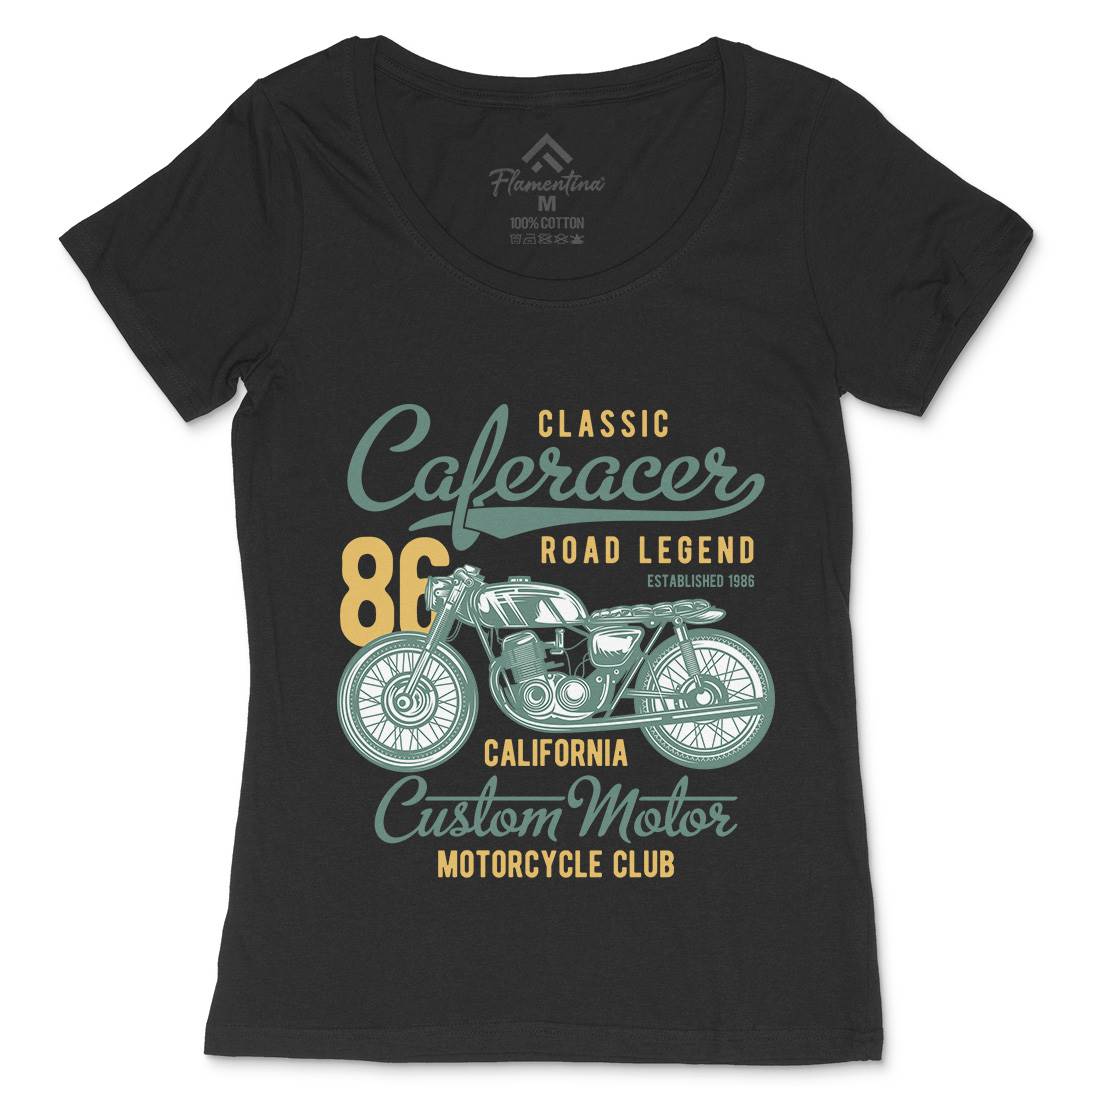 Caferacer Womens Scoop Neck T-Shirt Motorcycles B834